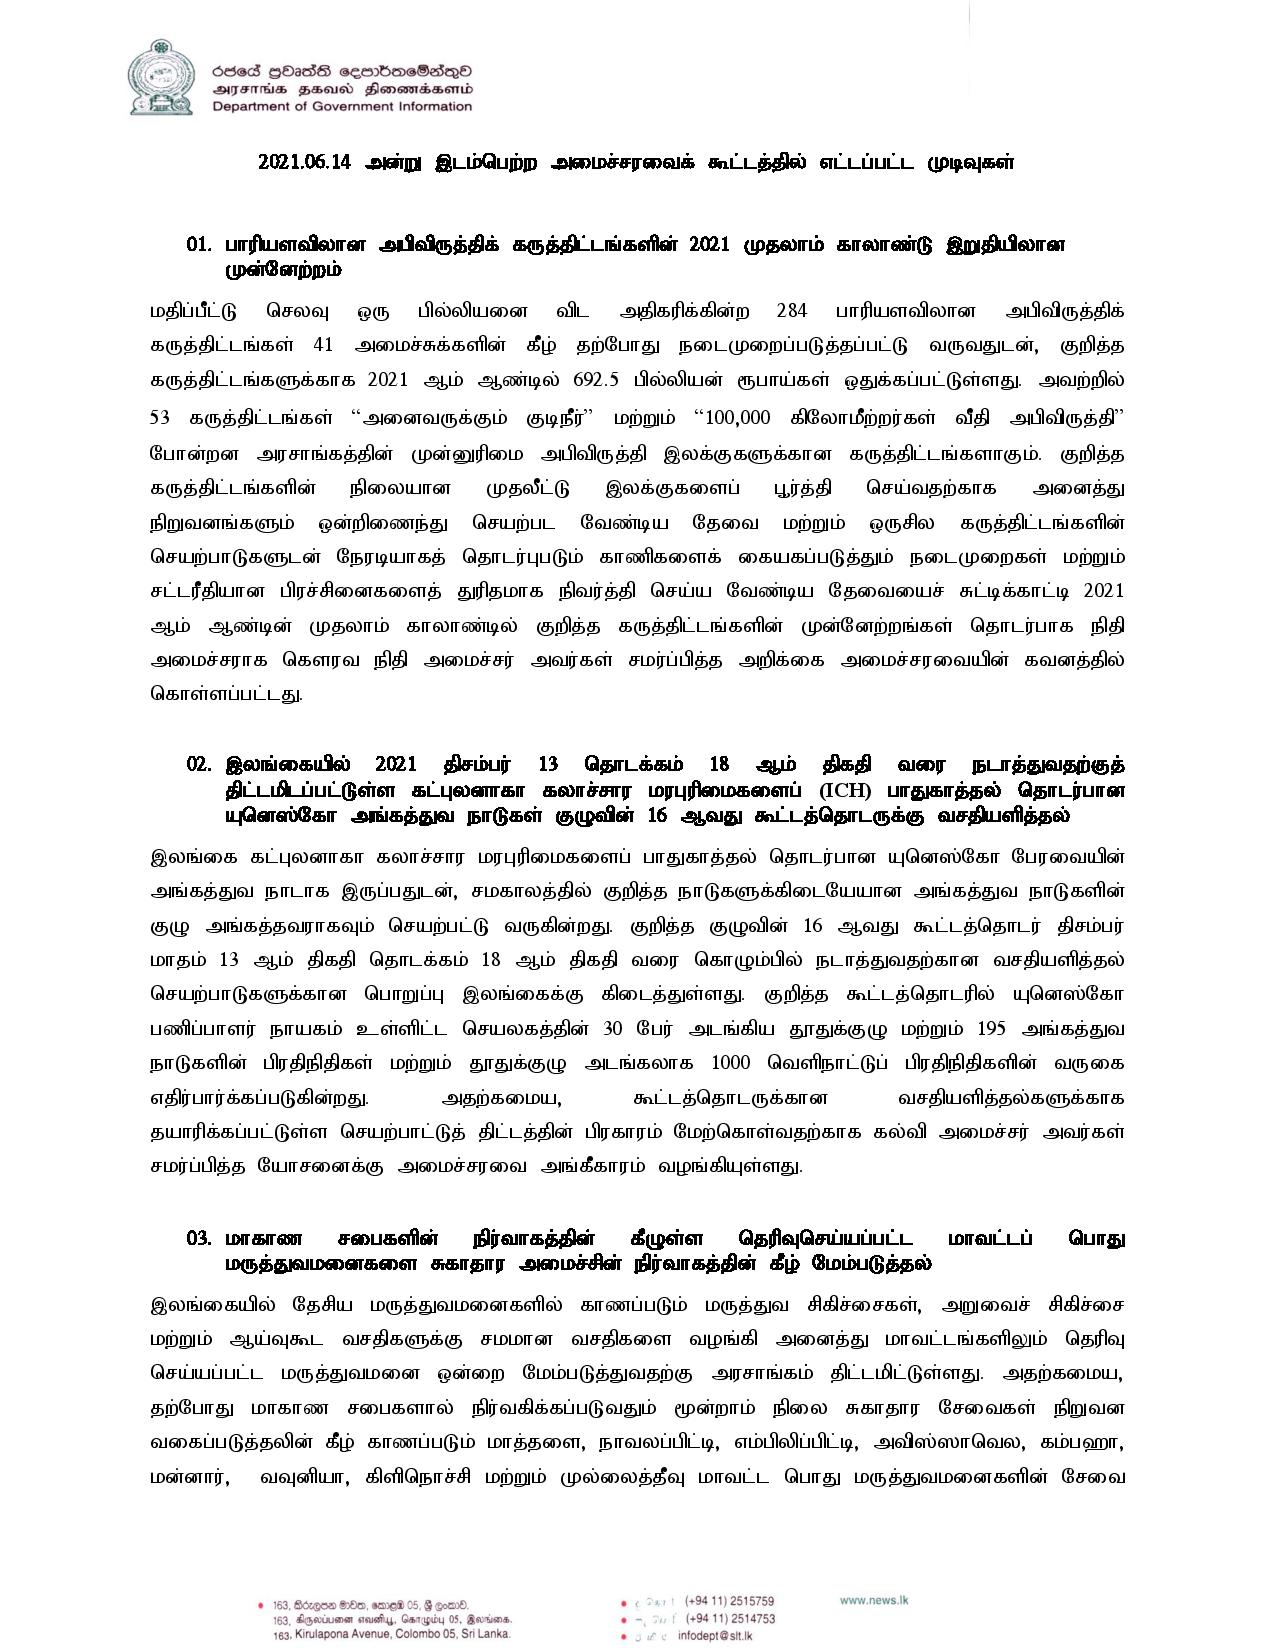 Cabinet Decisions 14.06.2021 Tamil page 001